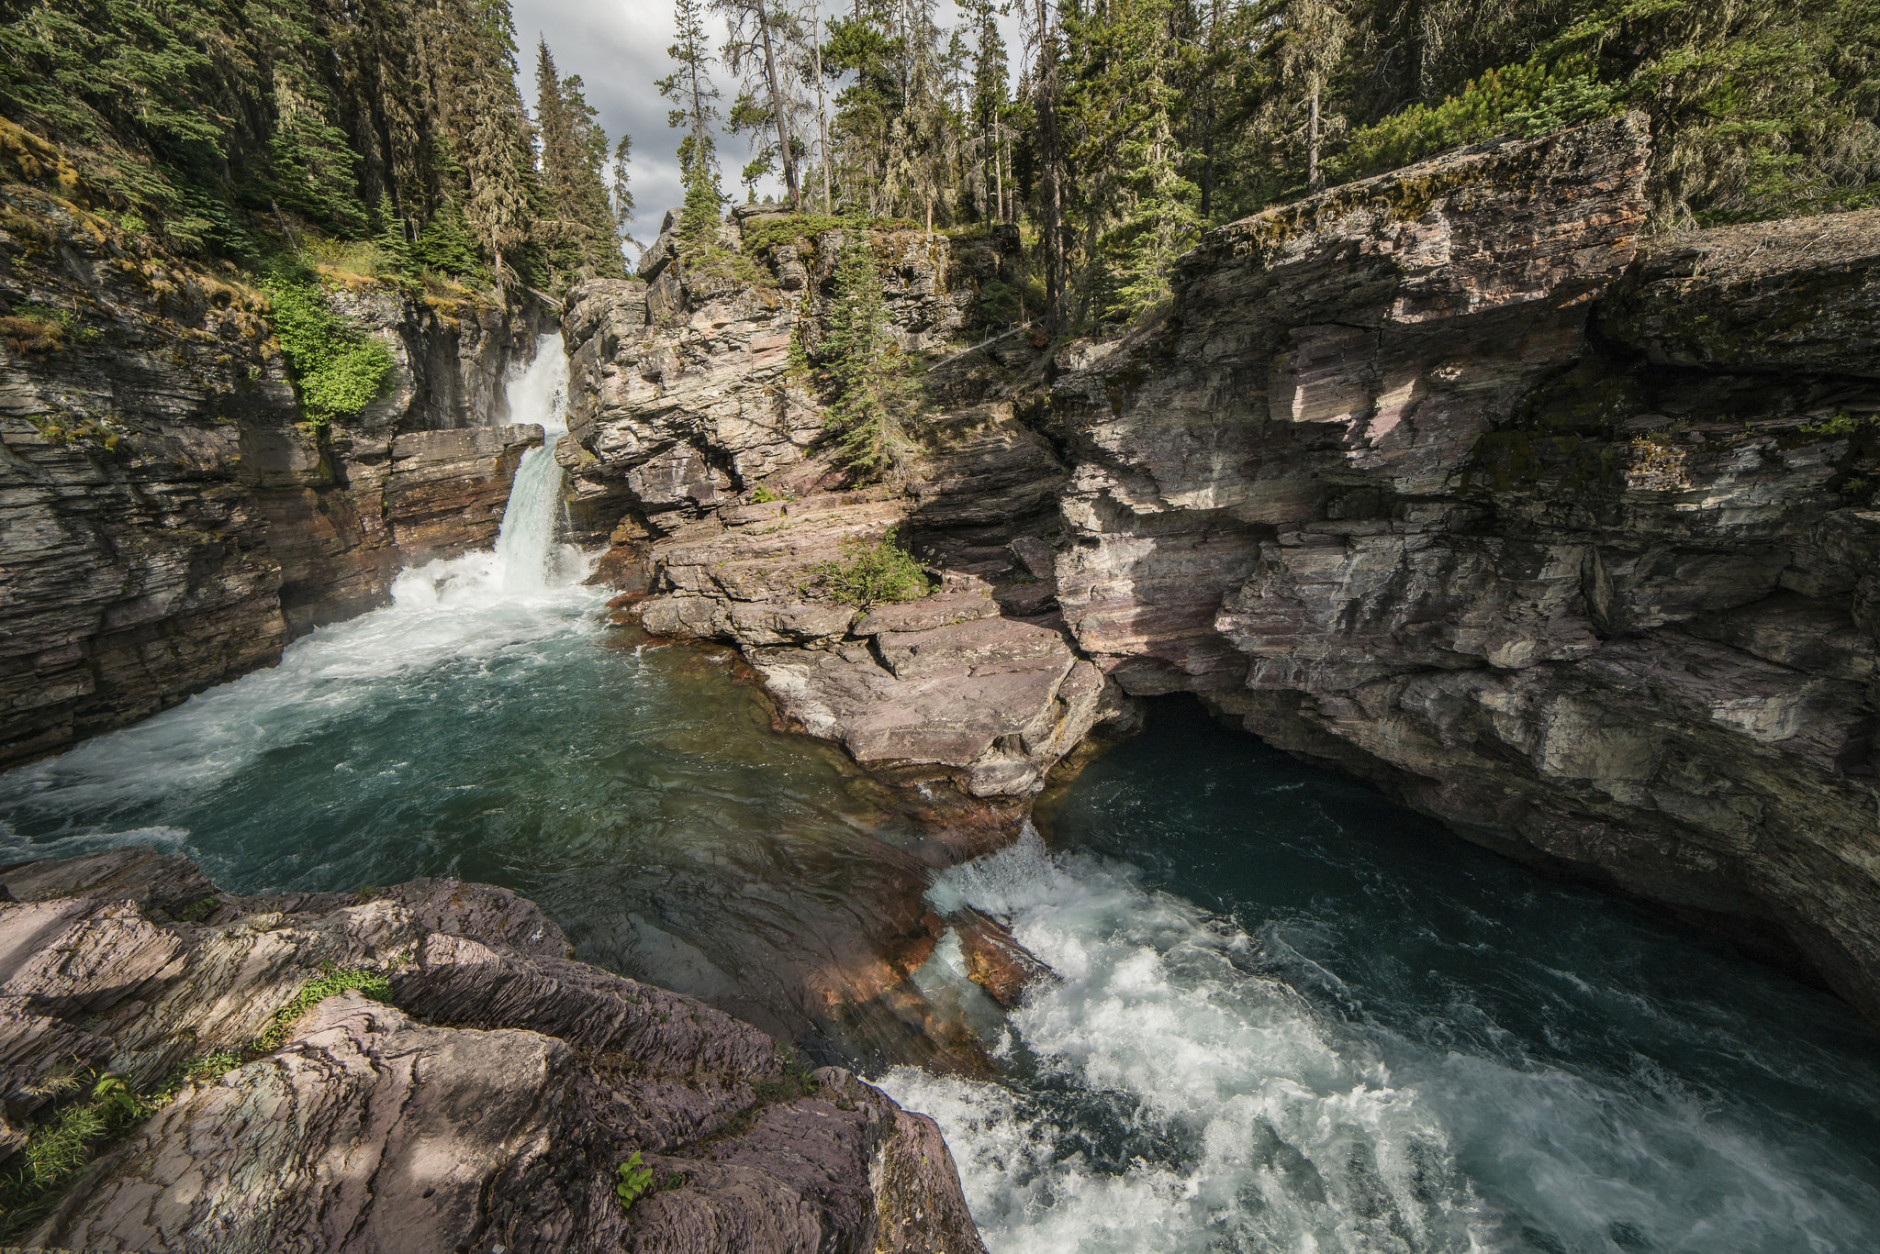 St. Mary Falls in Glacier National Park in Montana. (Courtesy flickr/Tim Rains, National Park Service)